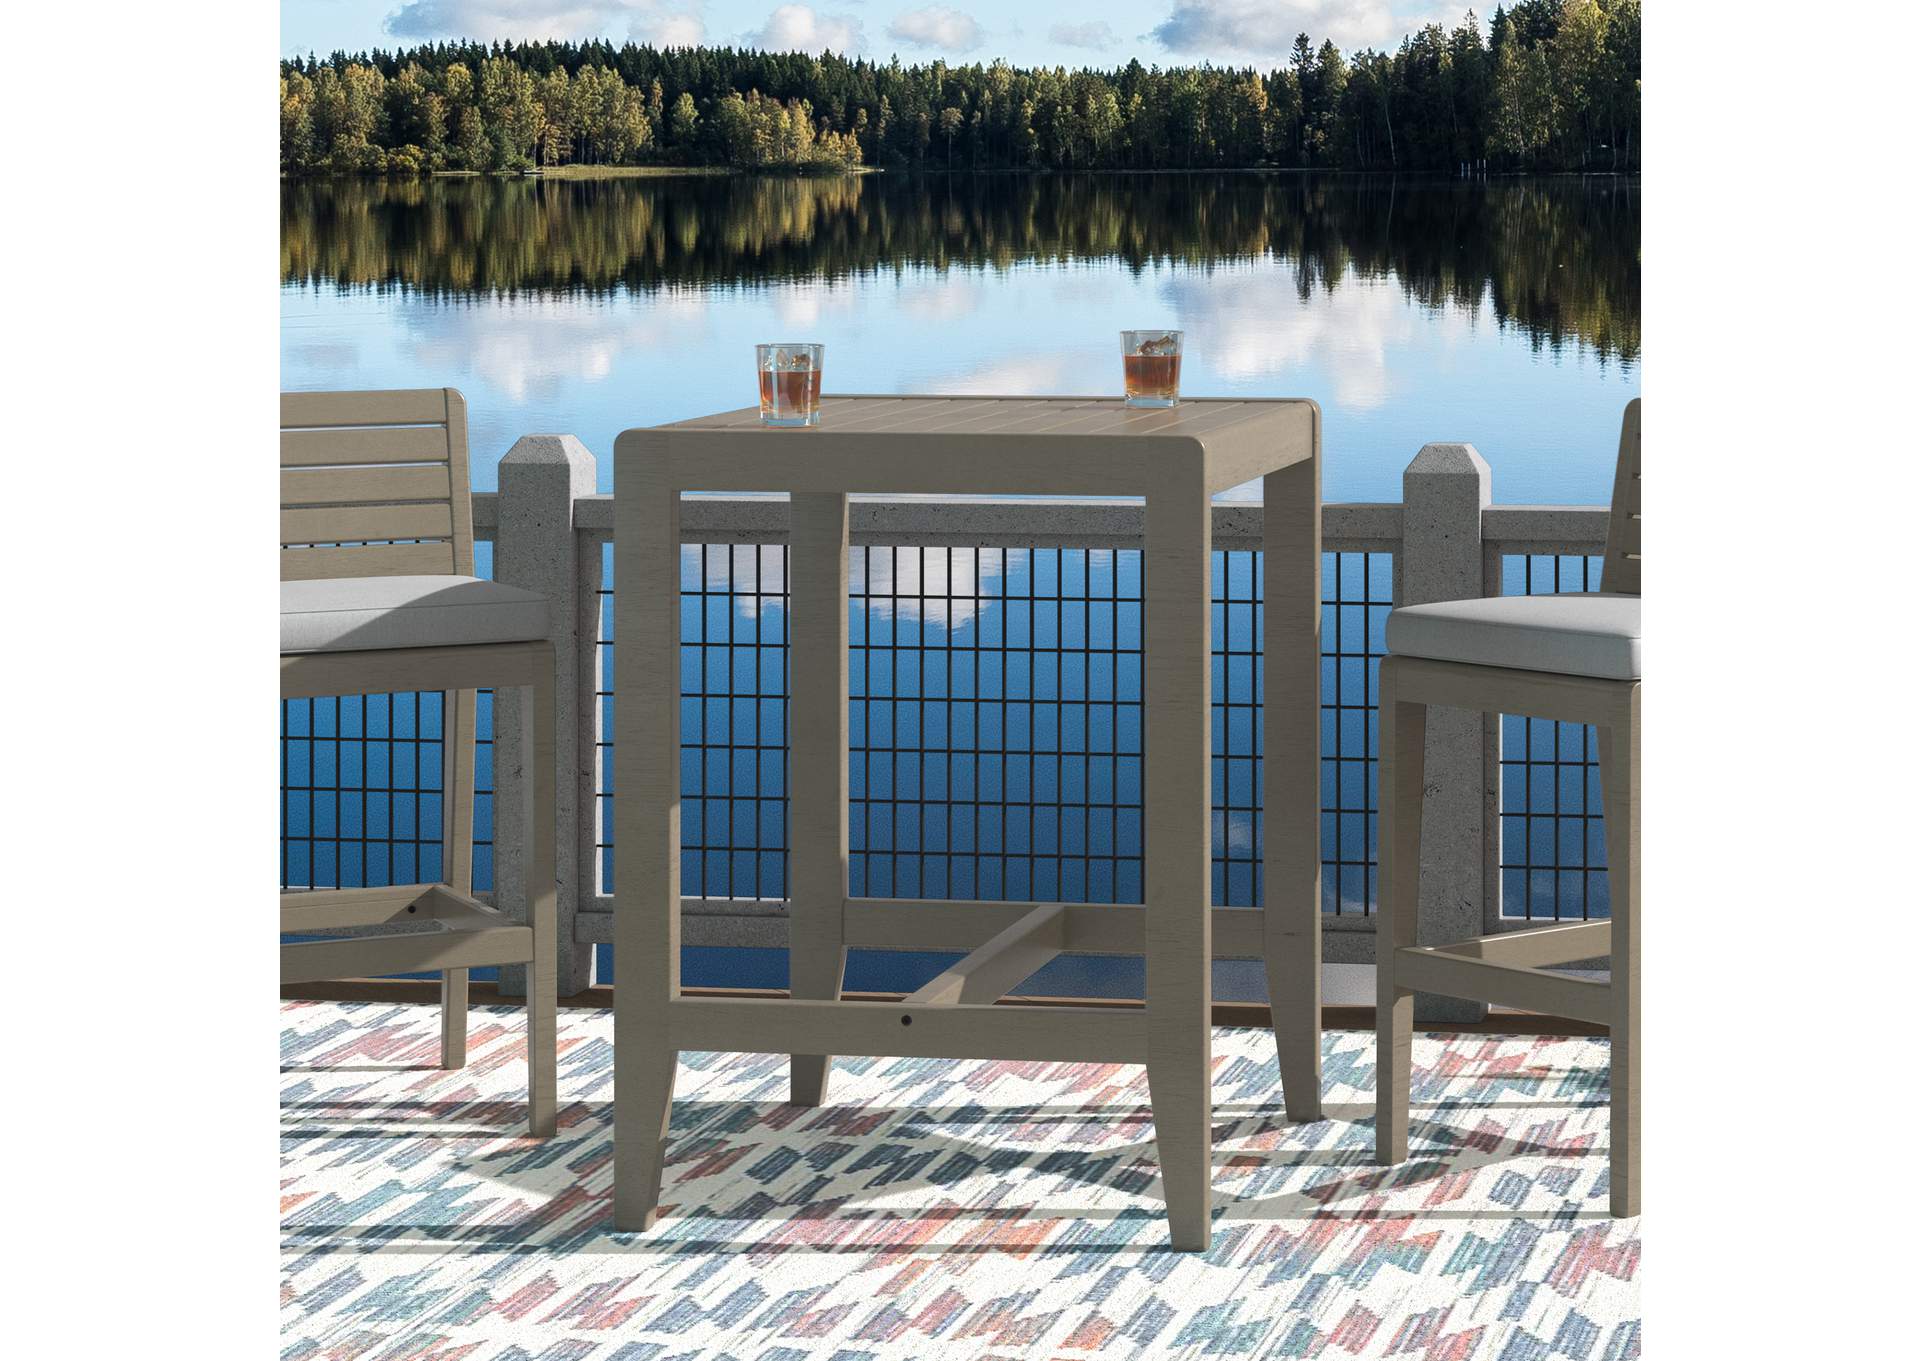 Sustain Outdoor High Bistro Table By Homestyles,Homestyles